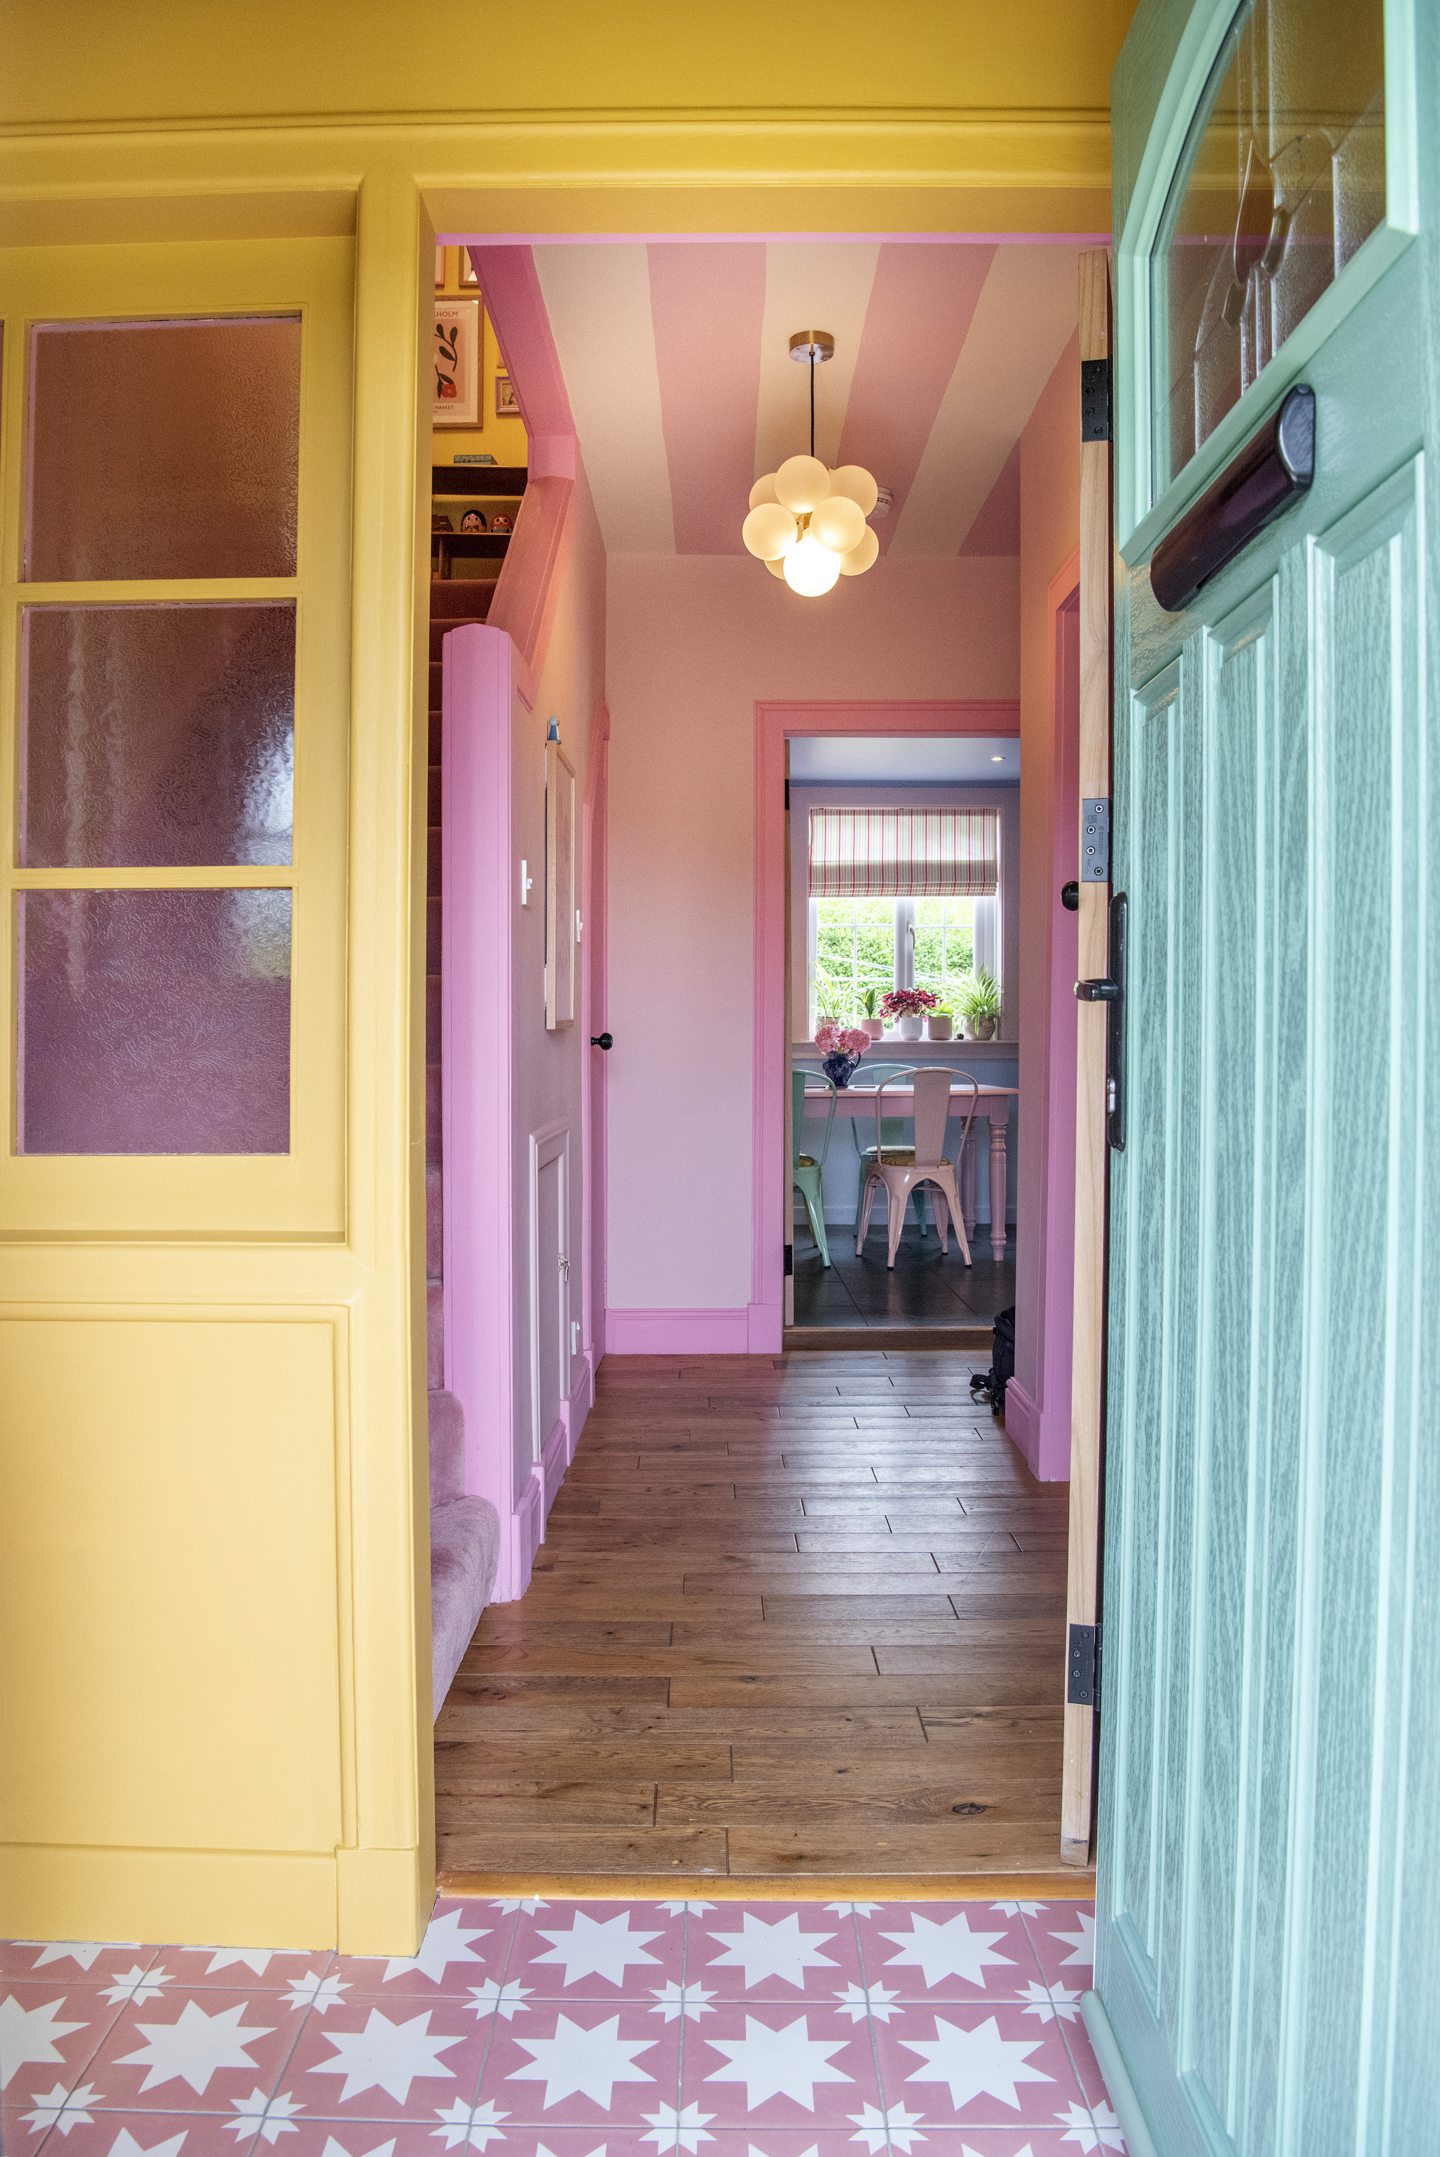 Every room in the Pink House features the colour pink, including the hallway